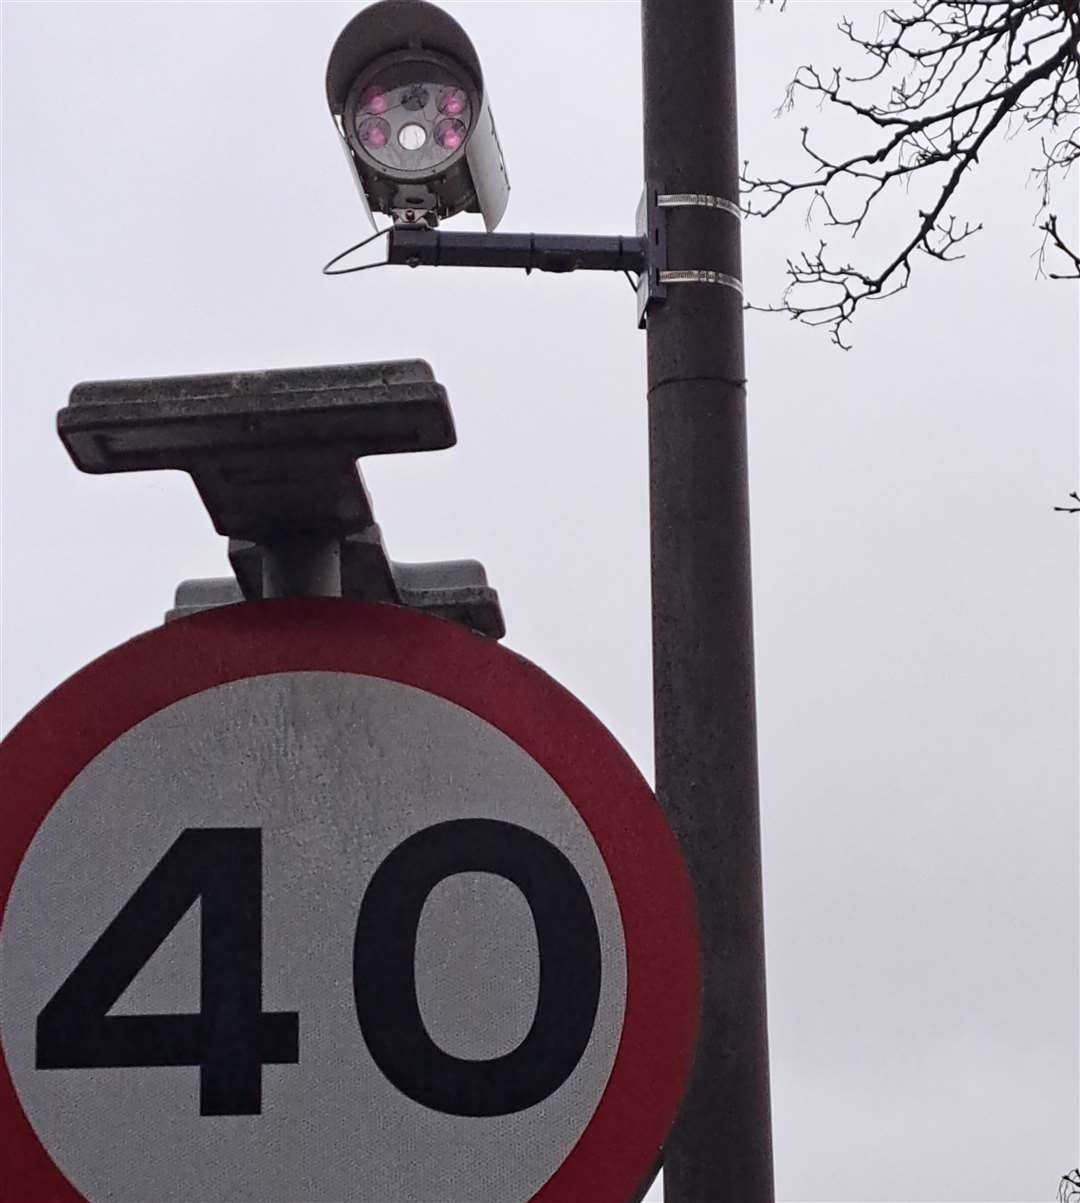 The new camera on Linton Hill has been put up by the police